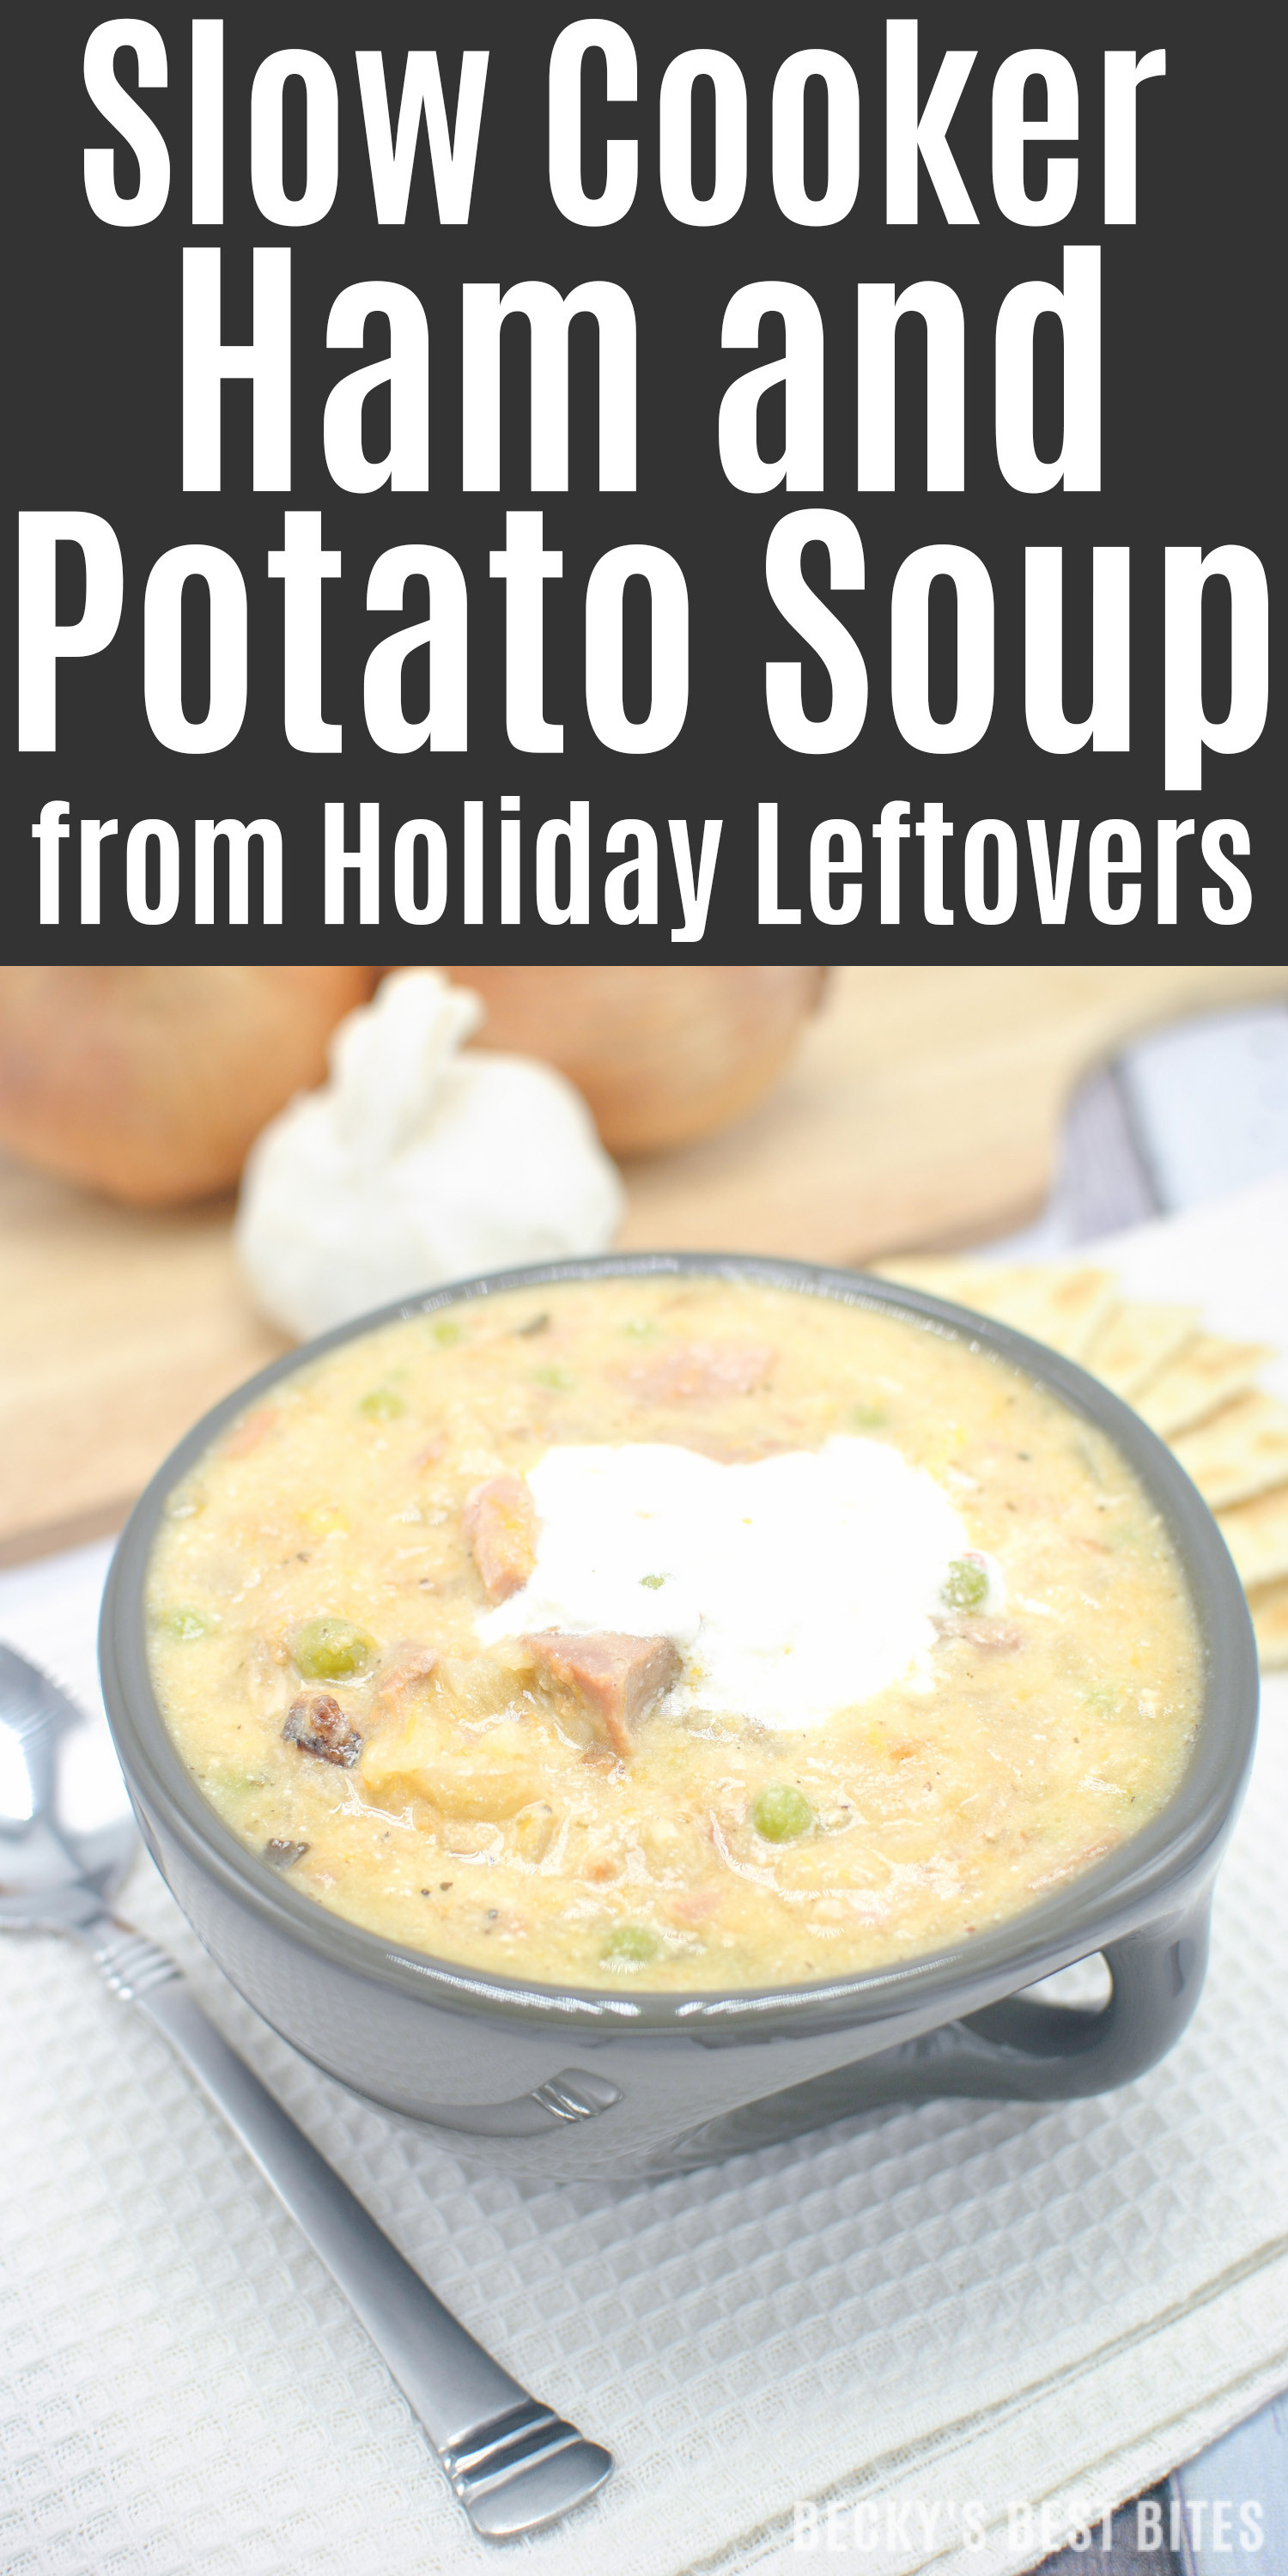 Slow Cooker Ham And Potato Soup
 Slow Cooker Ham and Potato Soup from Holiday Leftovers